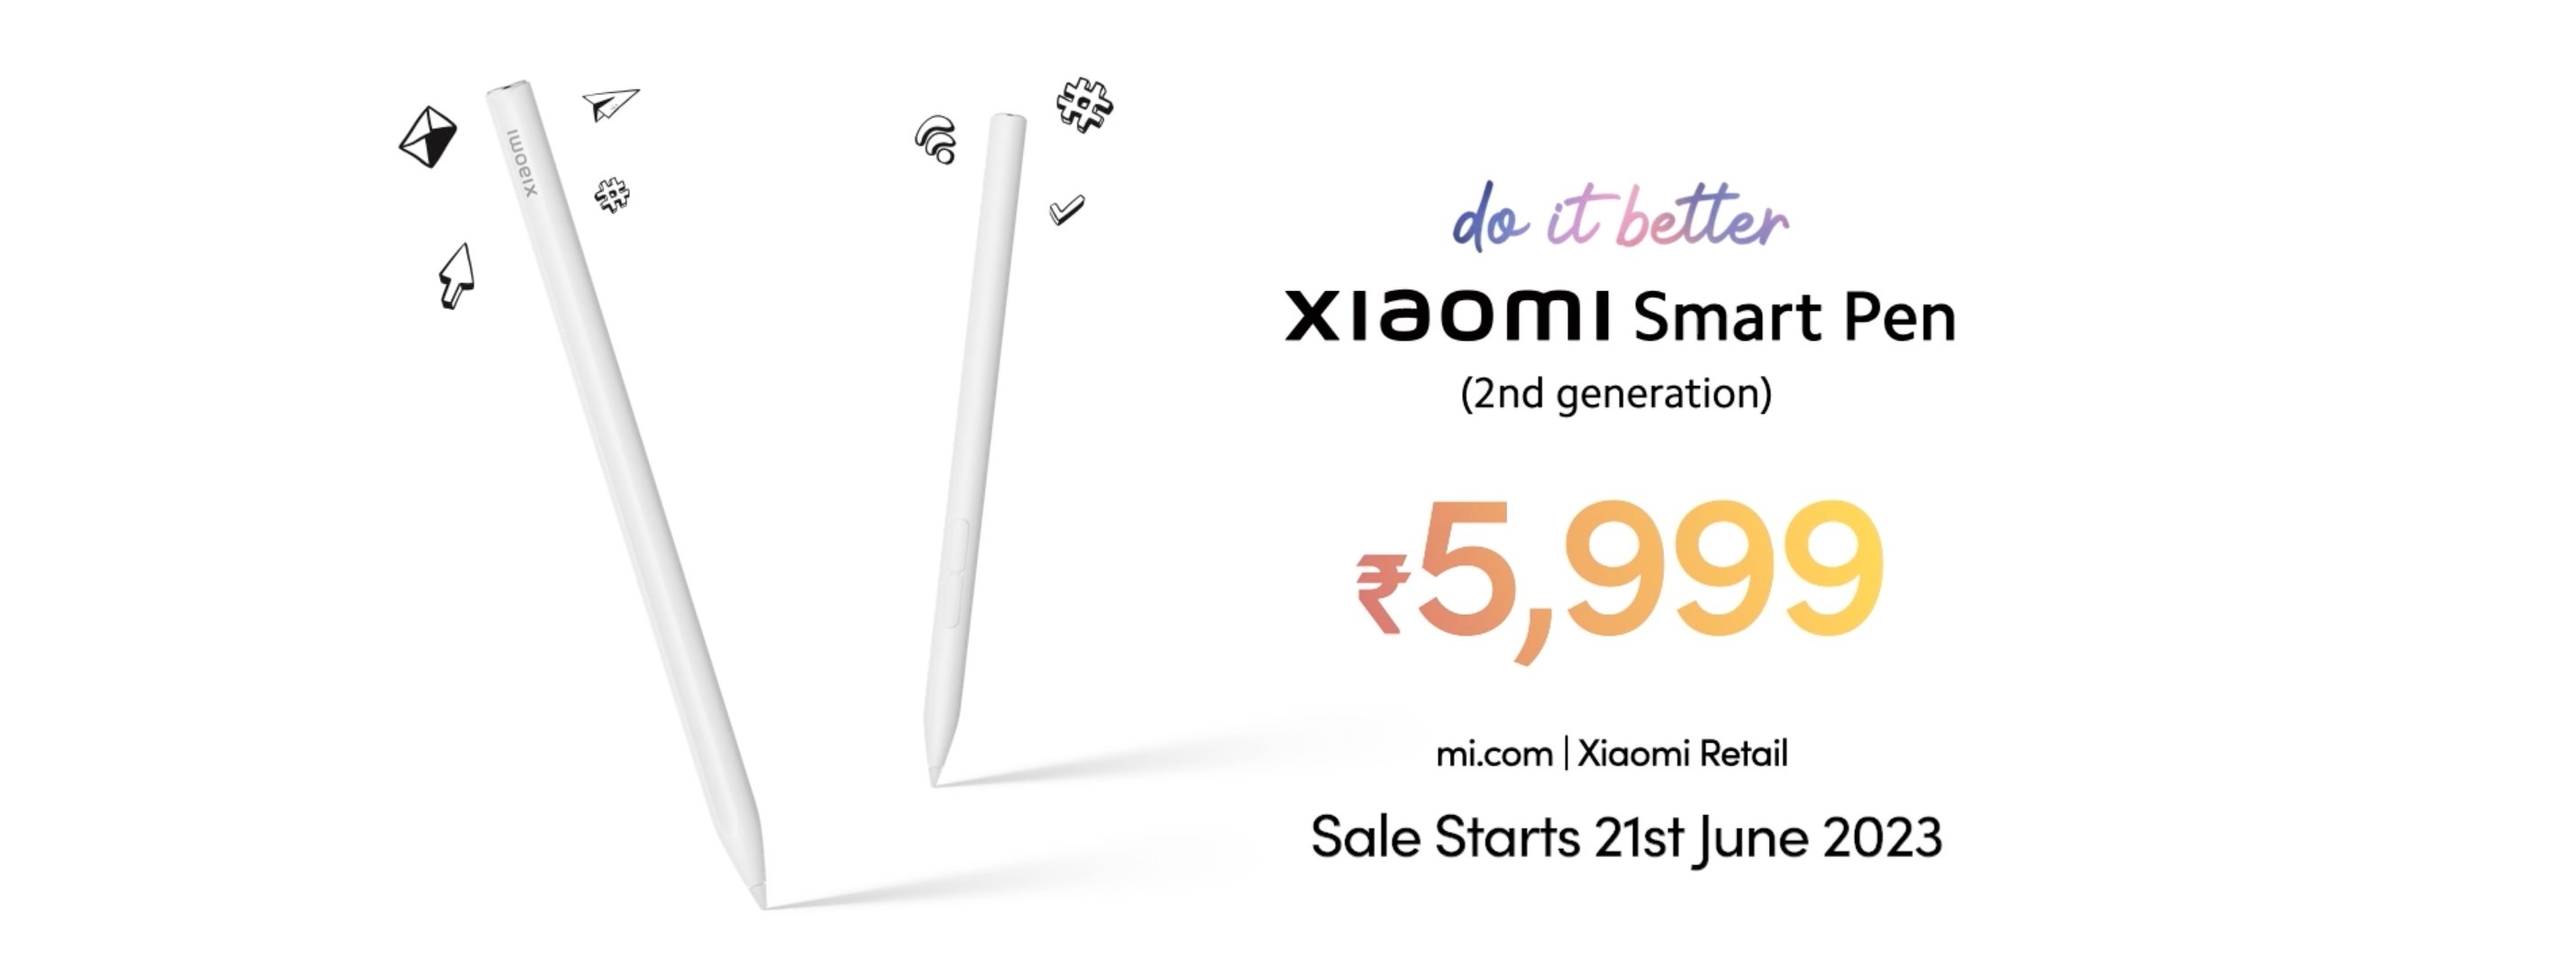 Xiaomi India on X: Ignite your imagination with the #XiaomiPad6 and its  Xiaomi Smart Pen (2nd Gen)! Boasting 150-hour battery life and 4096  pressure sensitivity levels, it's a creative force to be